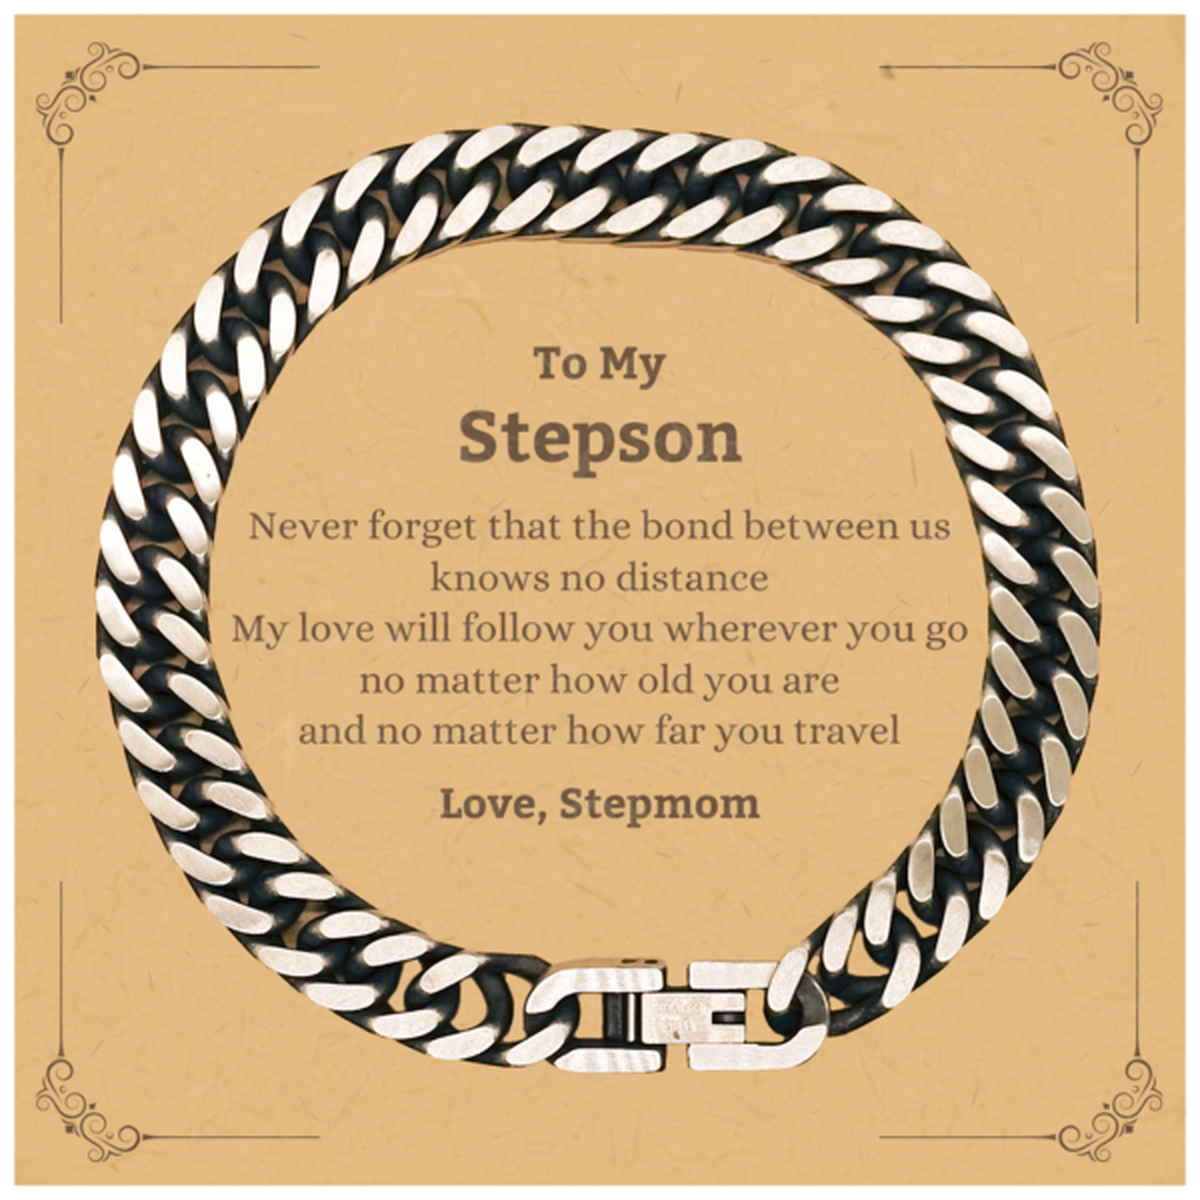 Stepson Birthday Gifts from Stepmom, Adjustable Cuban Link Chain Bracelet for Stepson Christmas Graduation Unique Gifts Stepson Never forget that the bond between us knows no distance. Love, Stepmom